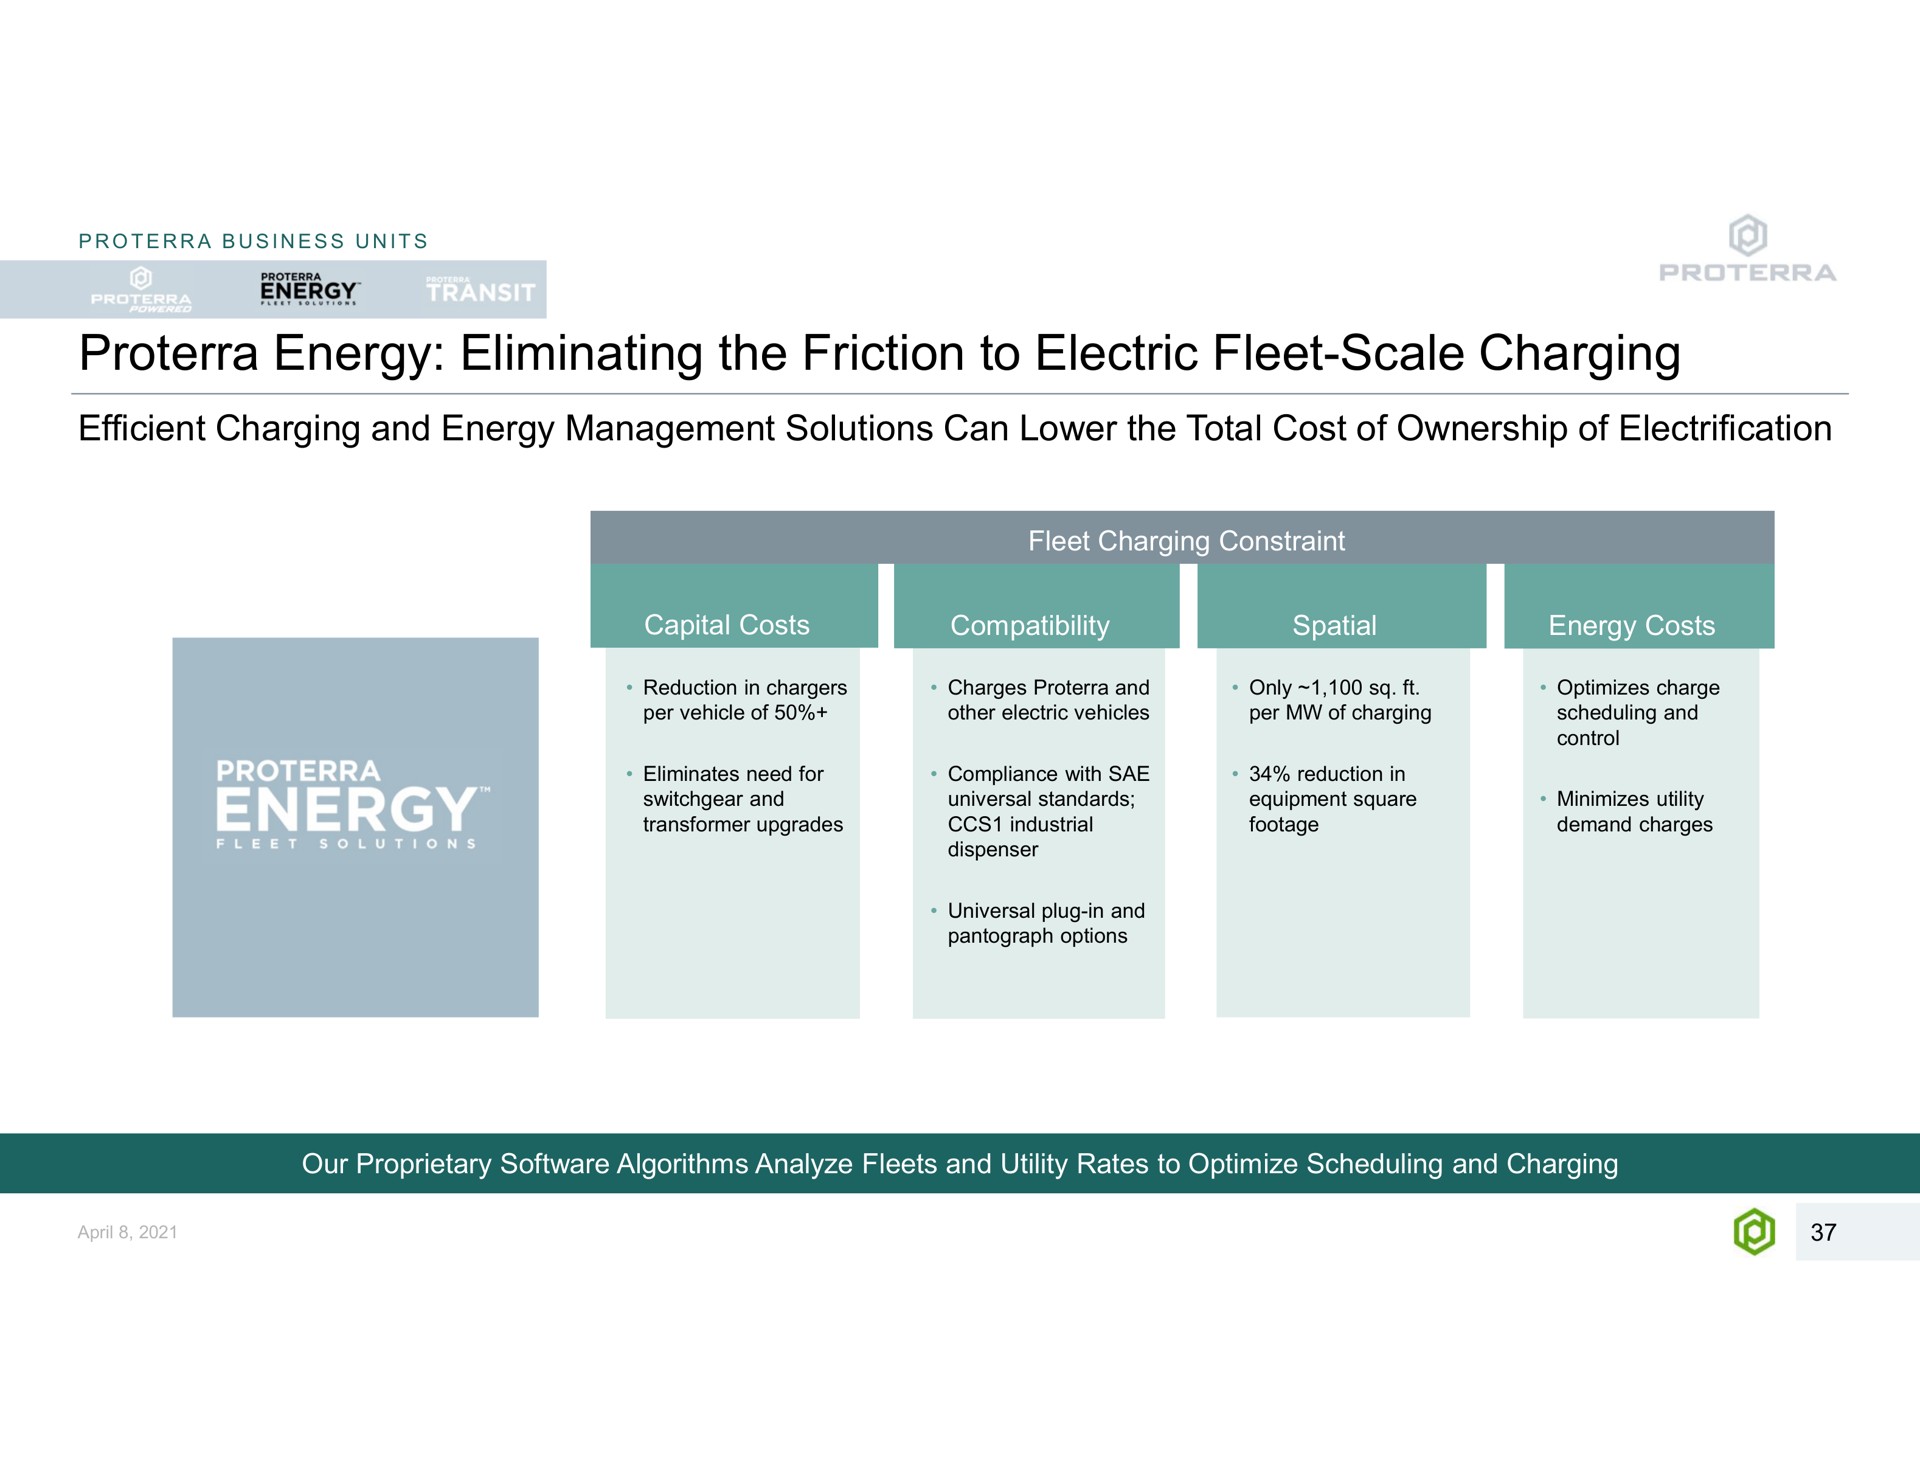 energy eliminating the friction to electric fleet scale charging business units efficient and management solutions can lower total cost of ownership of electrification fleet constraint capital costs compatibility spatial costs reduction in chargers per vehicle of charges and other vehicles only per of fleet solutions eliminates need for switchgear and transformer upgrades compliance with universal standards industrial dispenser reduction in equipment square footage optimizes charge scheduling and control minimizes utility demand charges universal plug in and pantograph options our proprietary algorithms analyze fleets and utility rates optimize scheduling and | Proterra